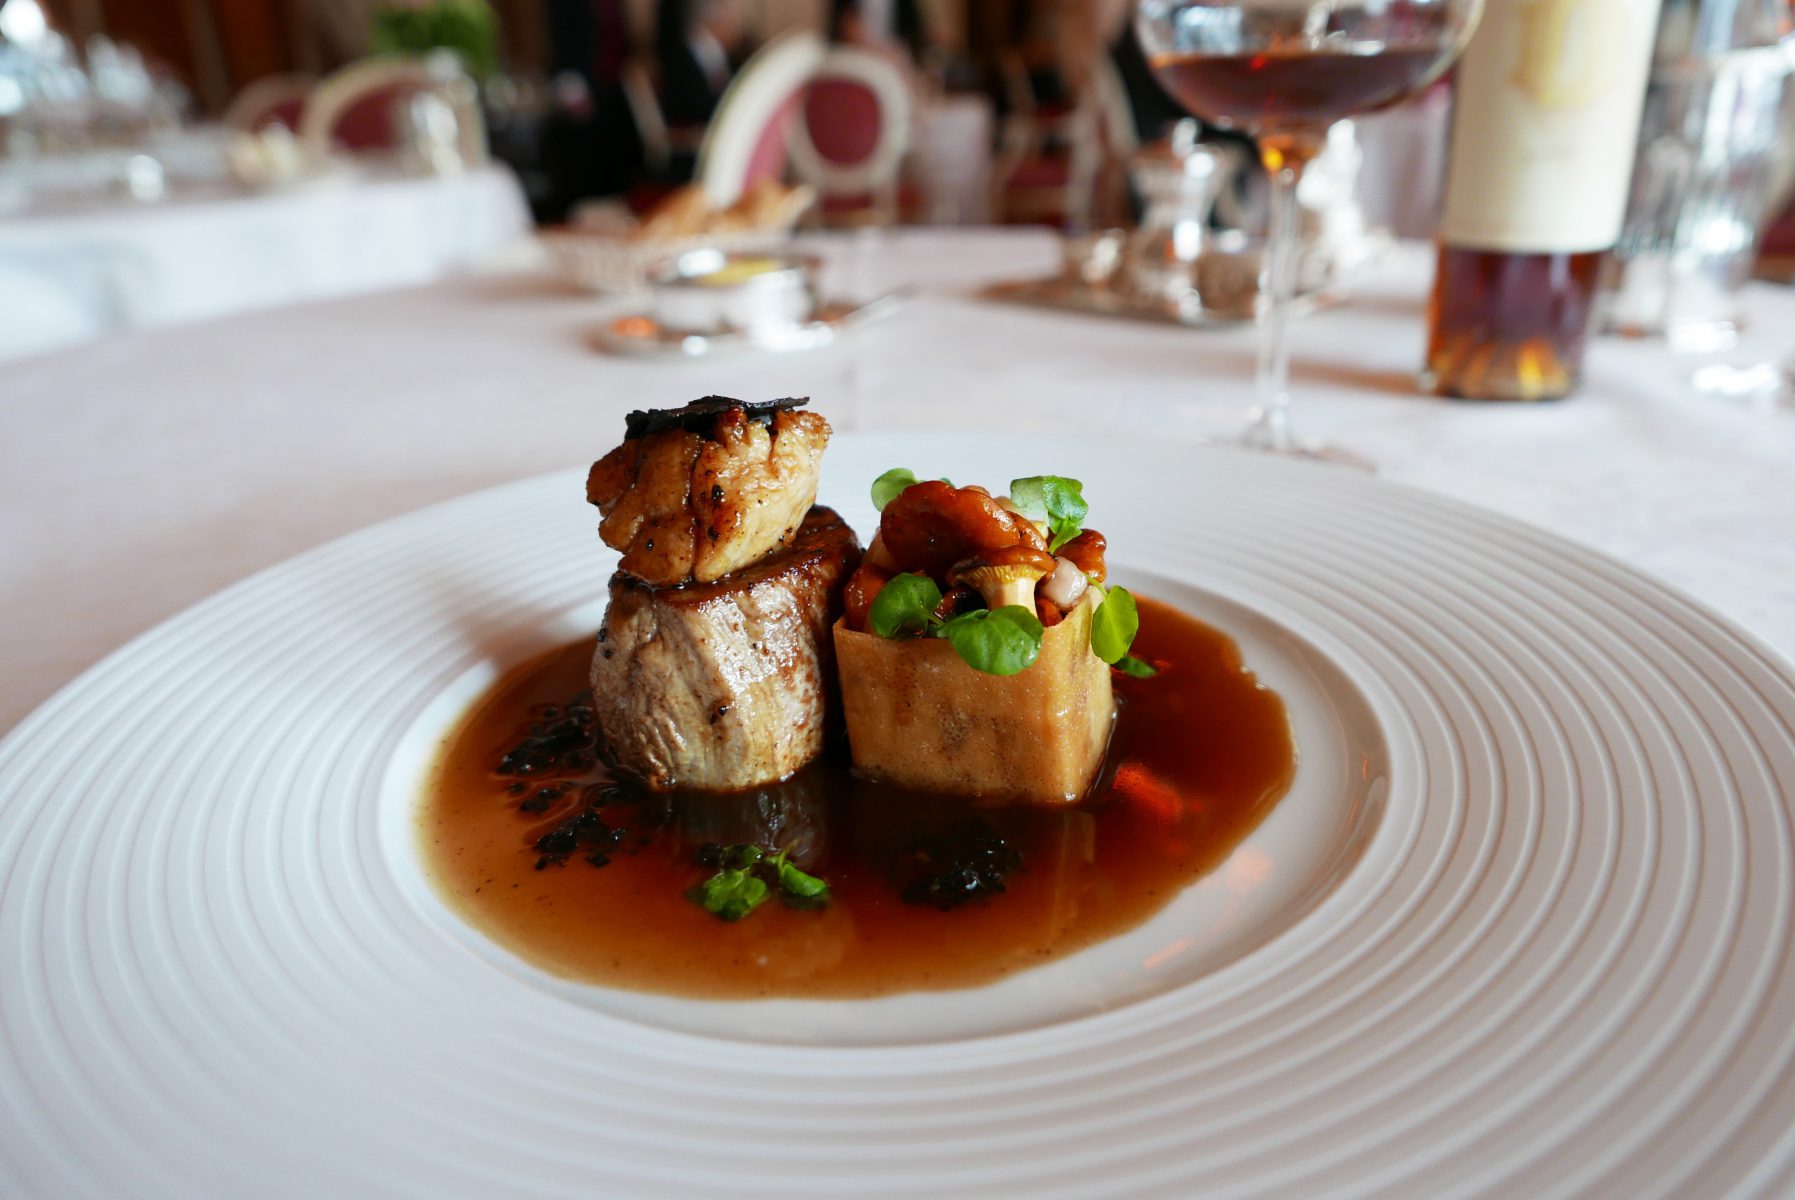 Veal, sweetbreads, black truffles and chanterelles paired with Fernando de Castilla Oloroso sherry. (by the award-winning head sommelier Giovanni Ferlito)